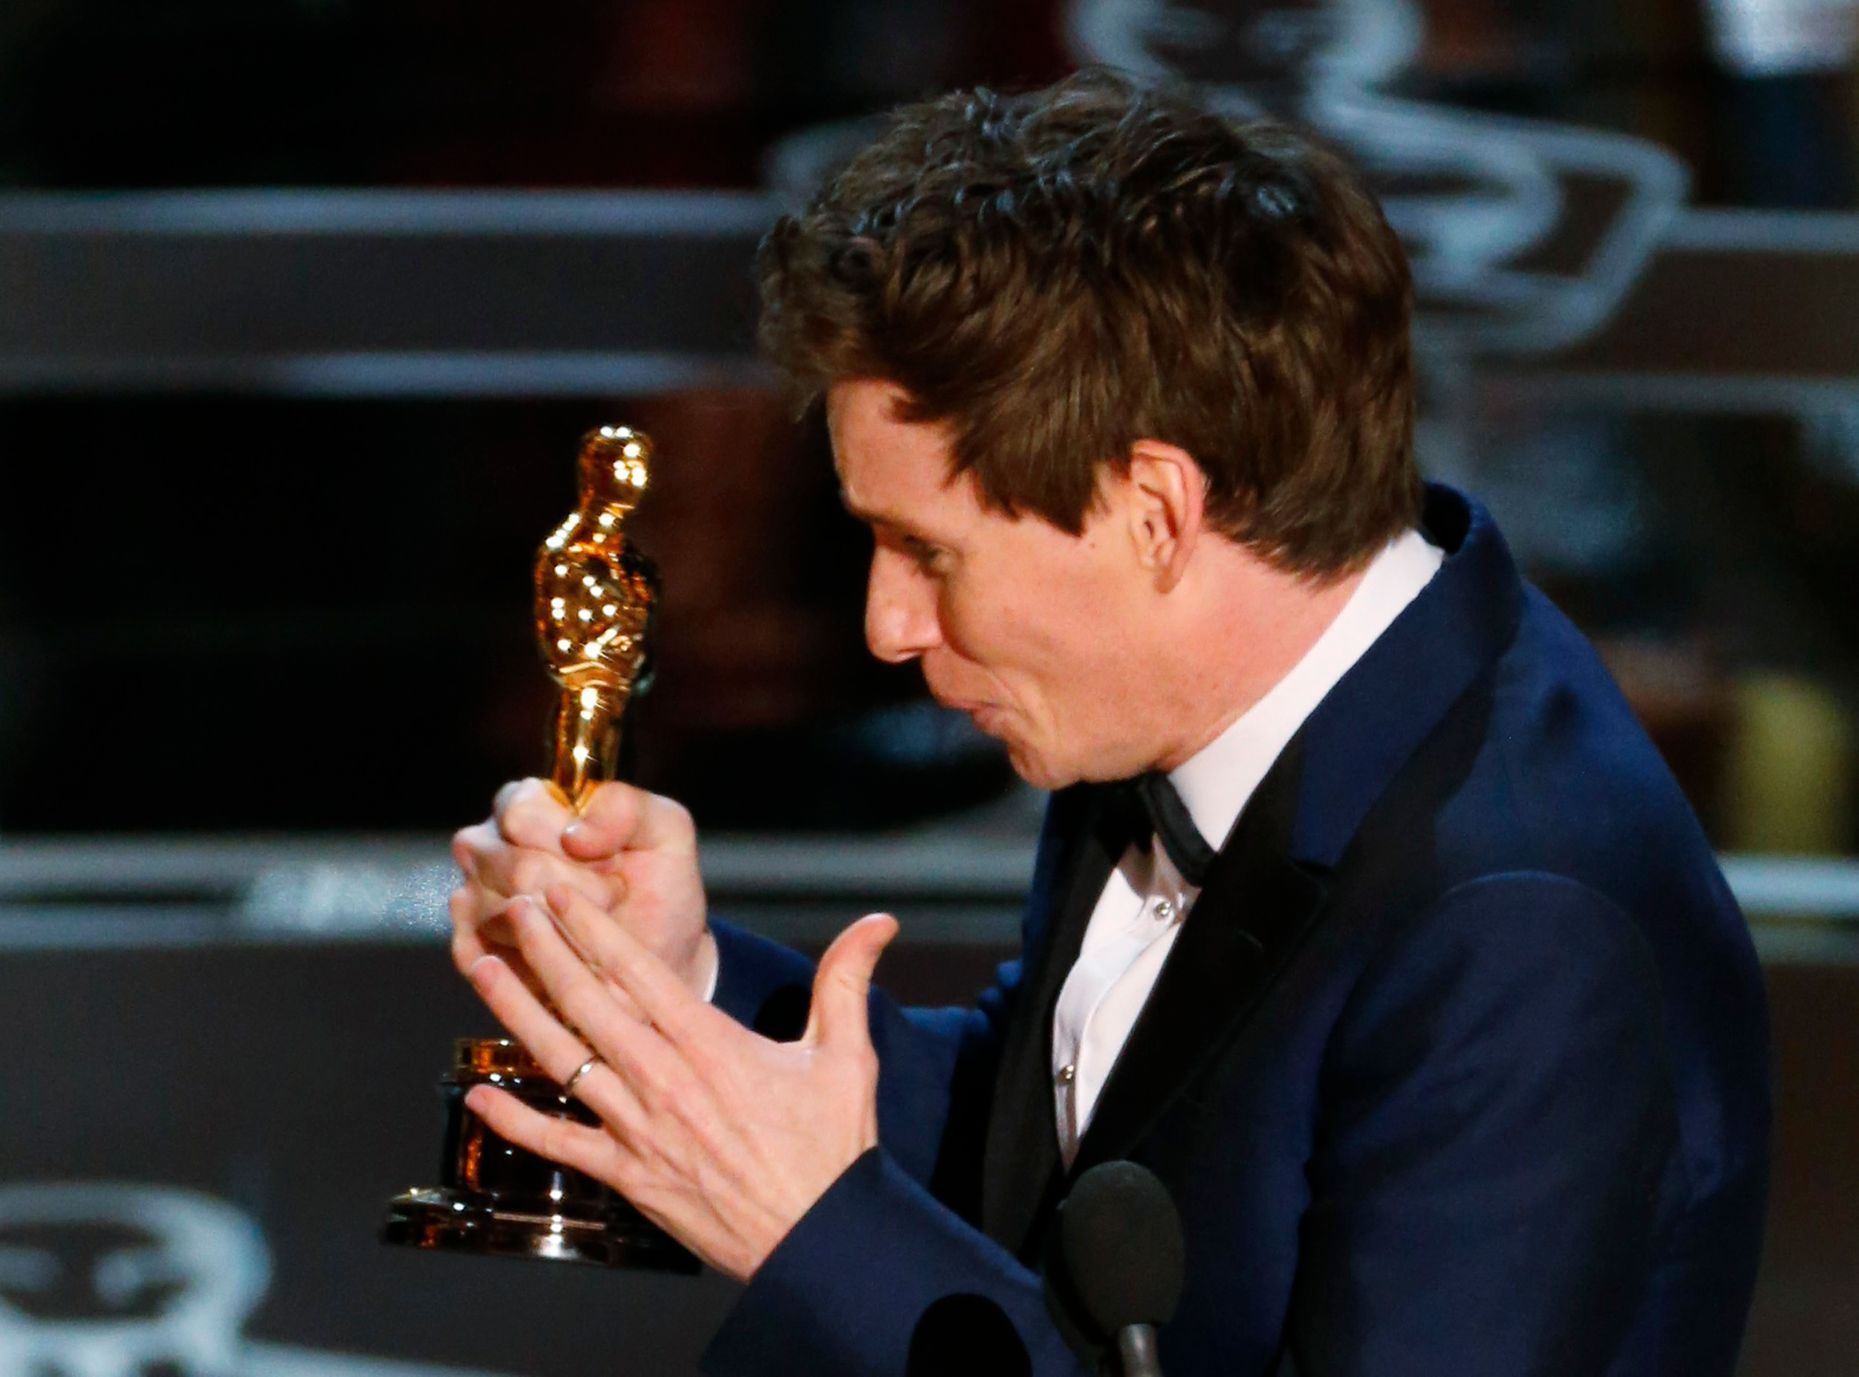 Actor Redmayne reacts after winning the Oscar for best actor for his role in &quot;The Theory of Everything&quot; during the 87th Academy Awards in Hollywood